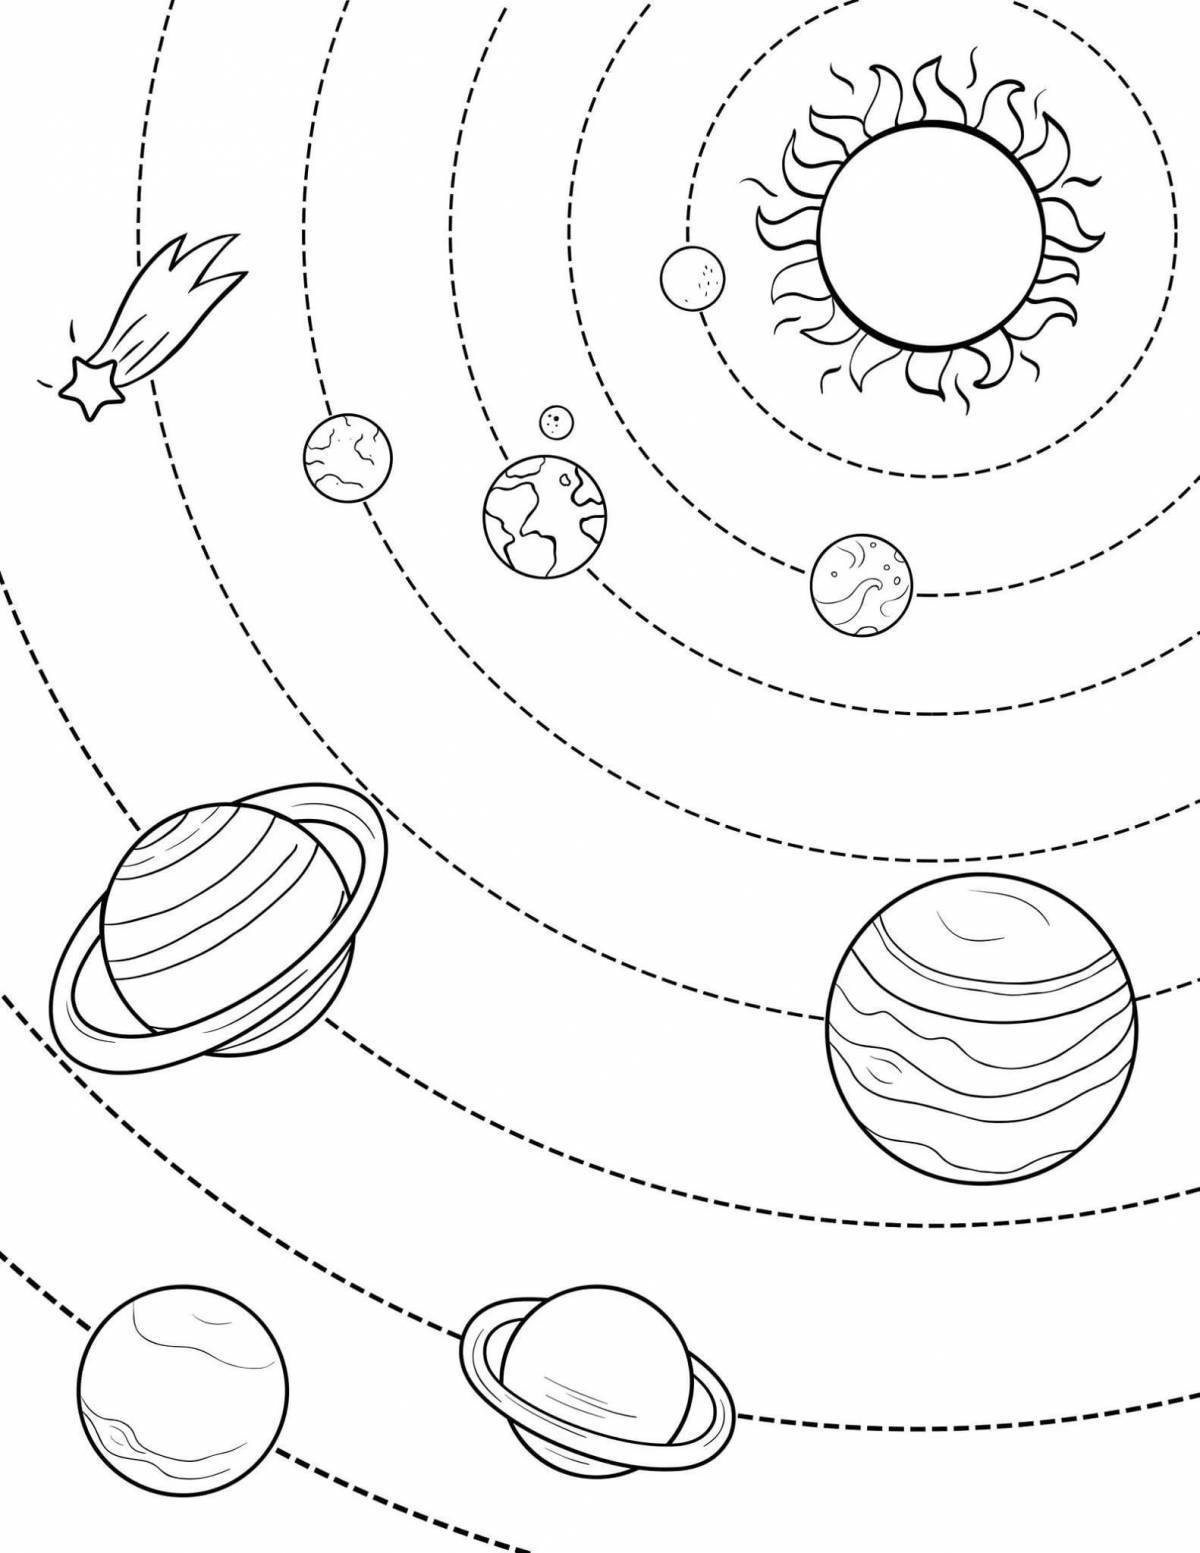 Colourful coloring of the planets of the solar system for children